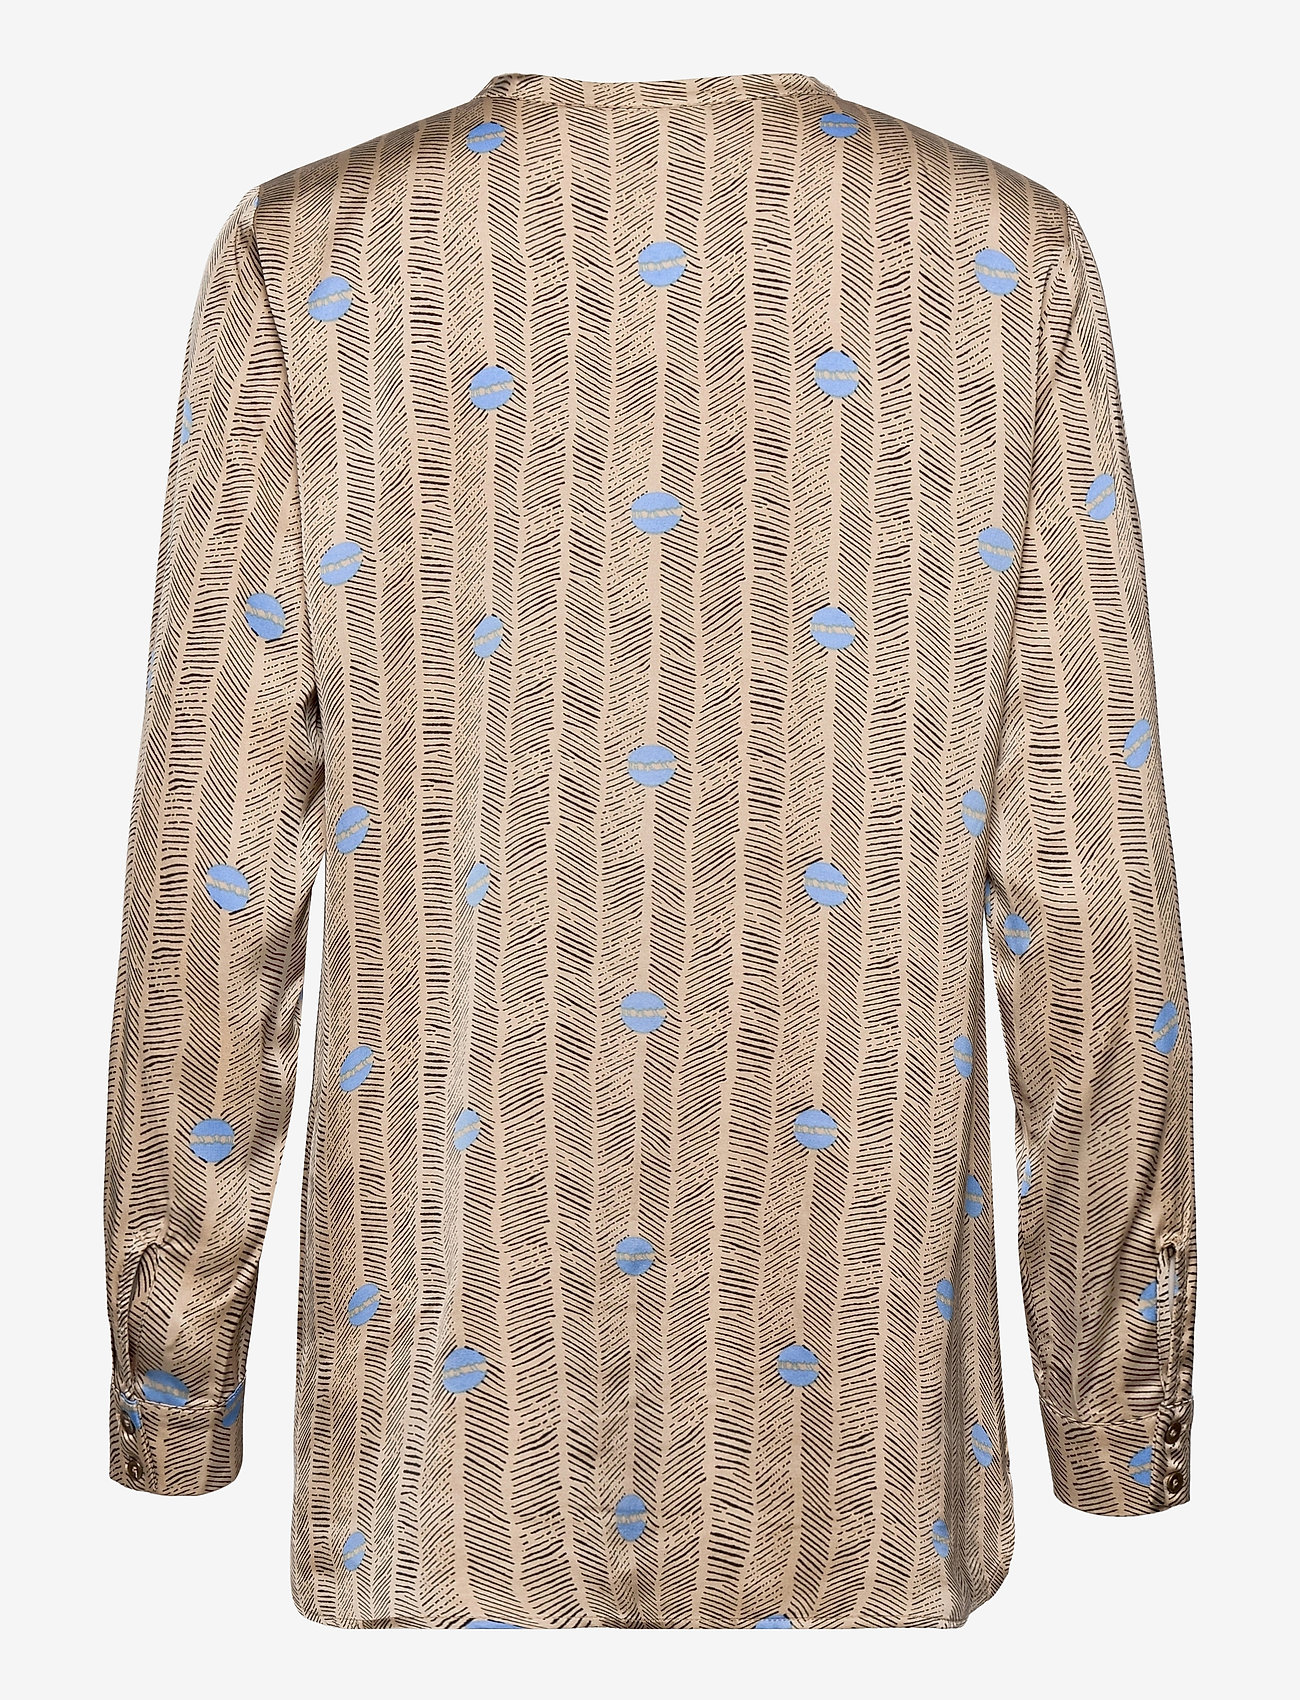 Coster Copenhagen - Shirt blouse in Sprout print - langärmlige blusen - sprout print - sand - 1